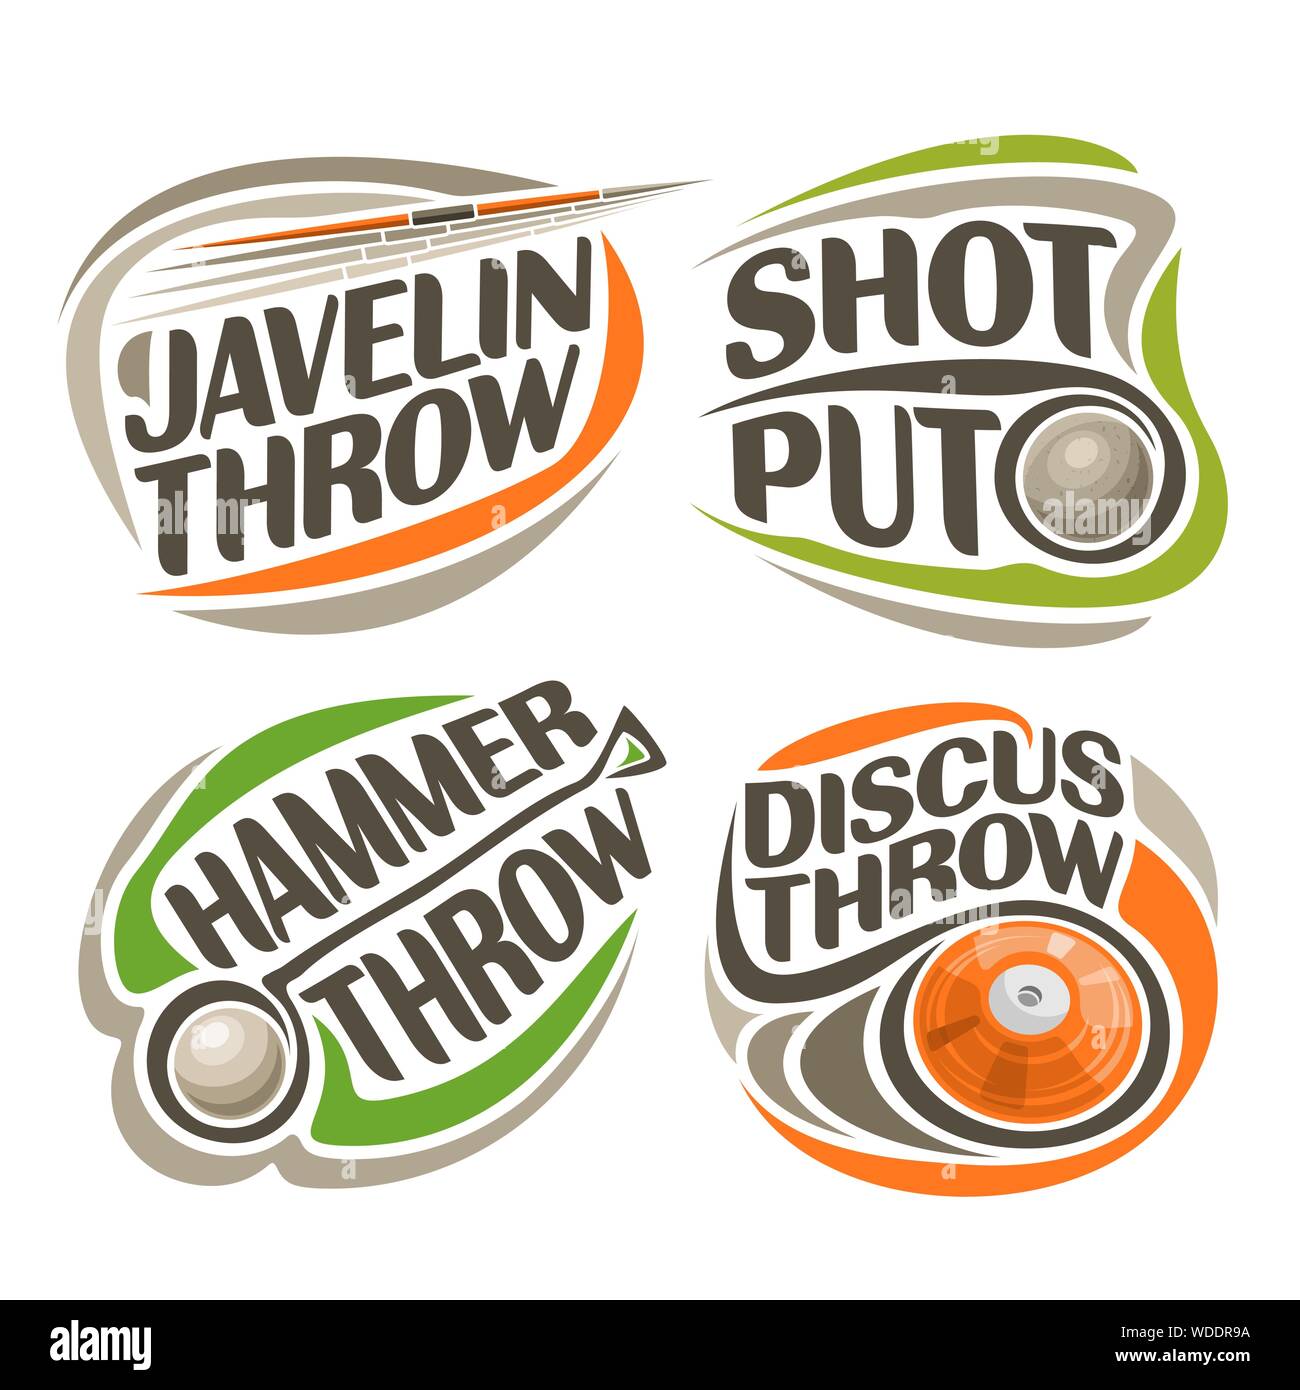 Vector logo for Athletics Equipment, consisting of abstract metal discus throw, shot put, throwing hammer, javelin. Track and field athletics equipmen Stock Vector